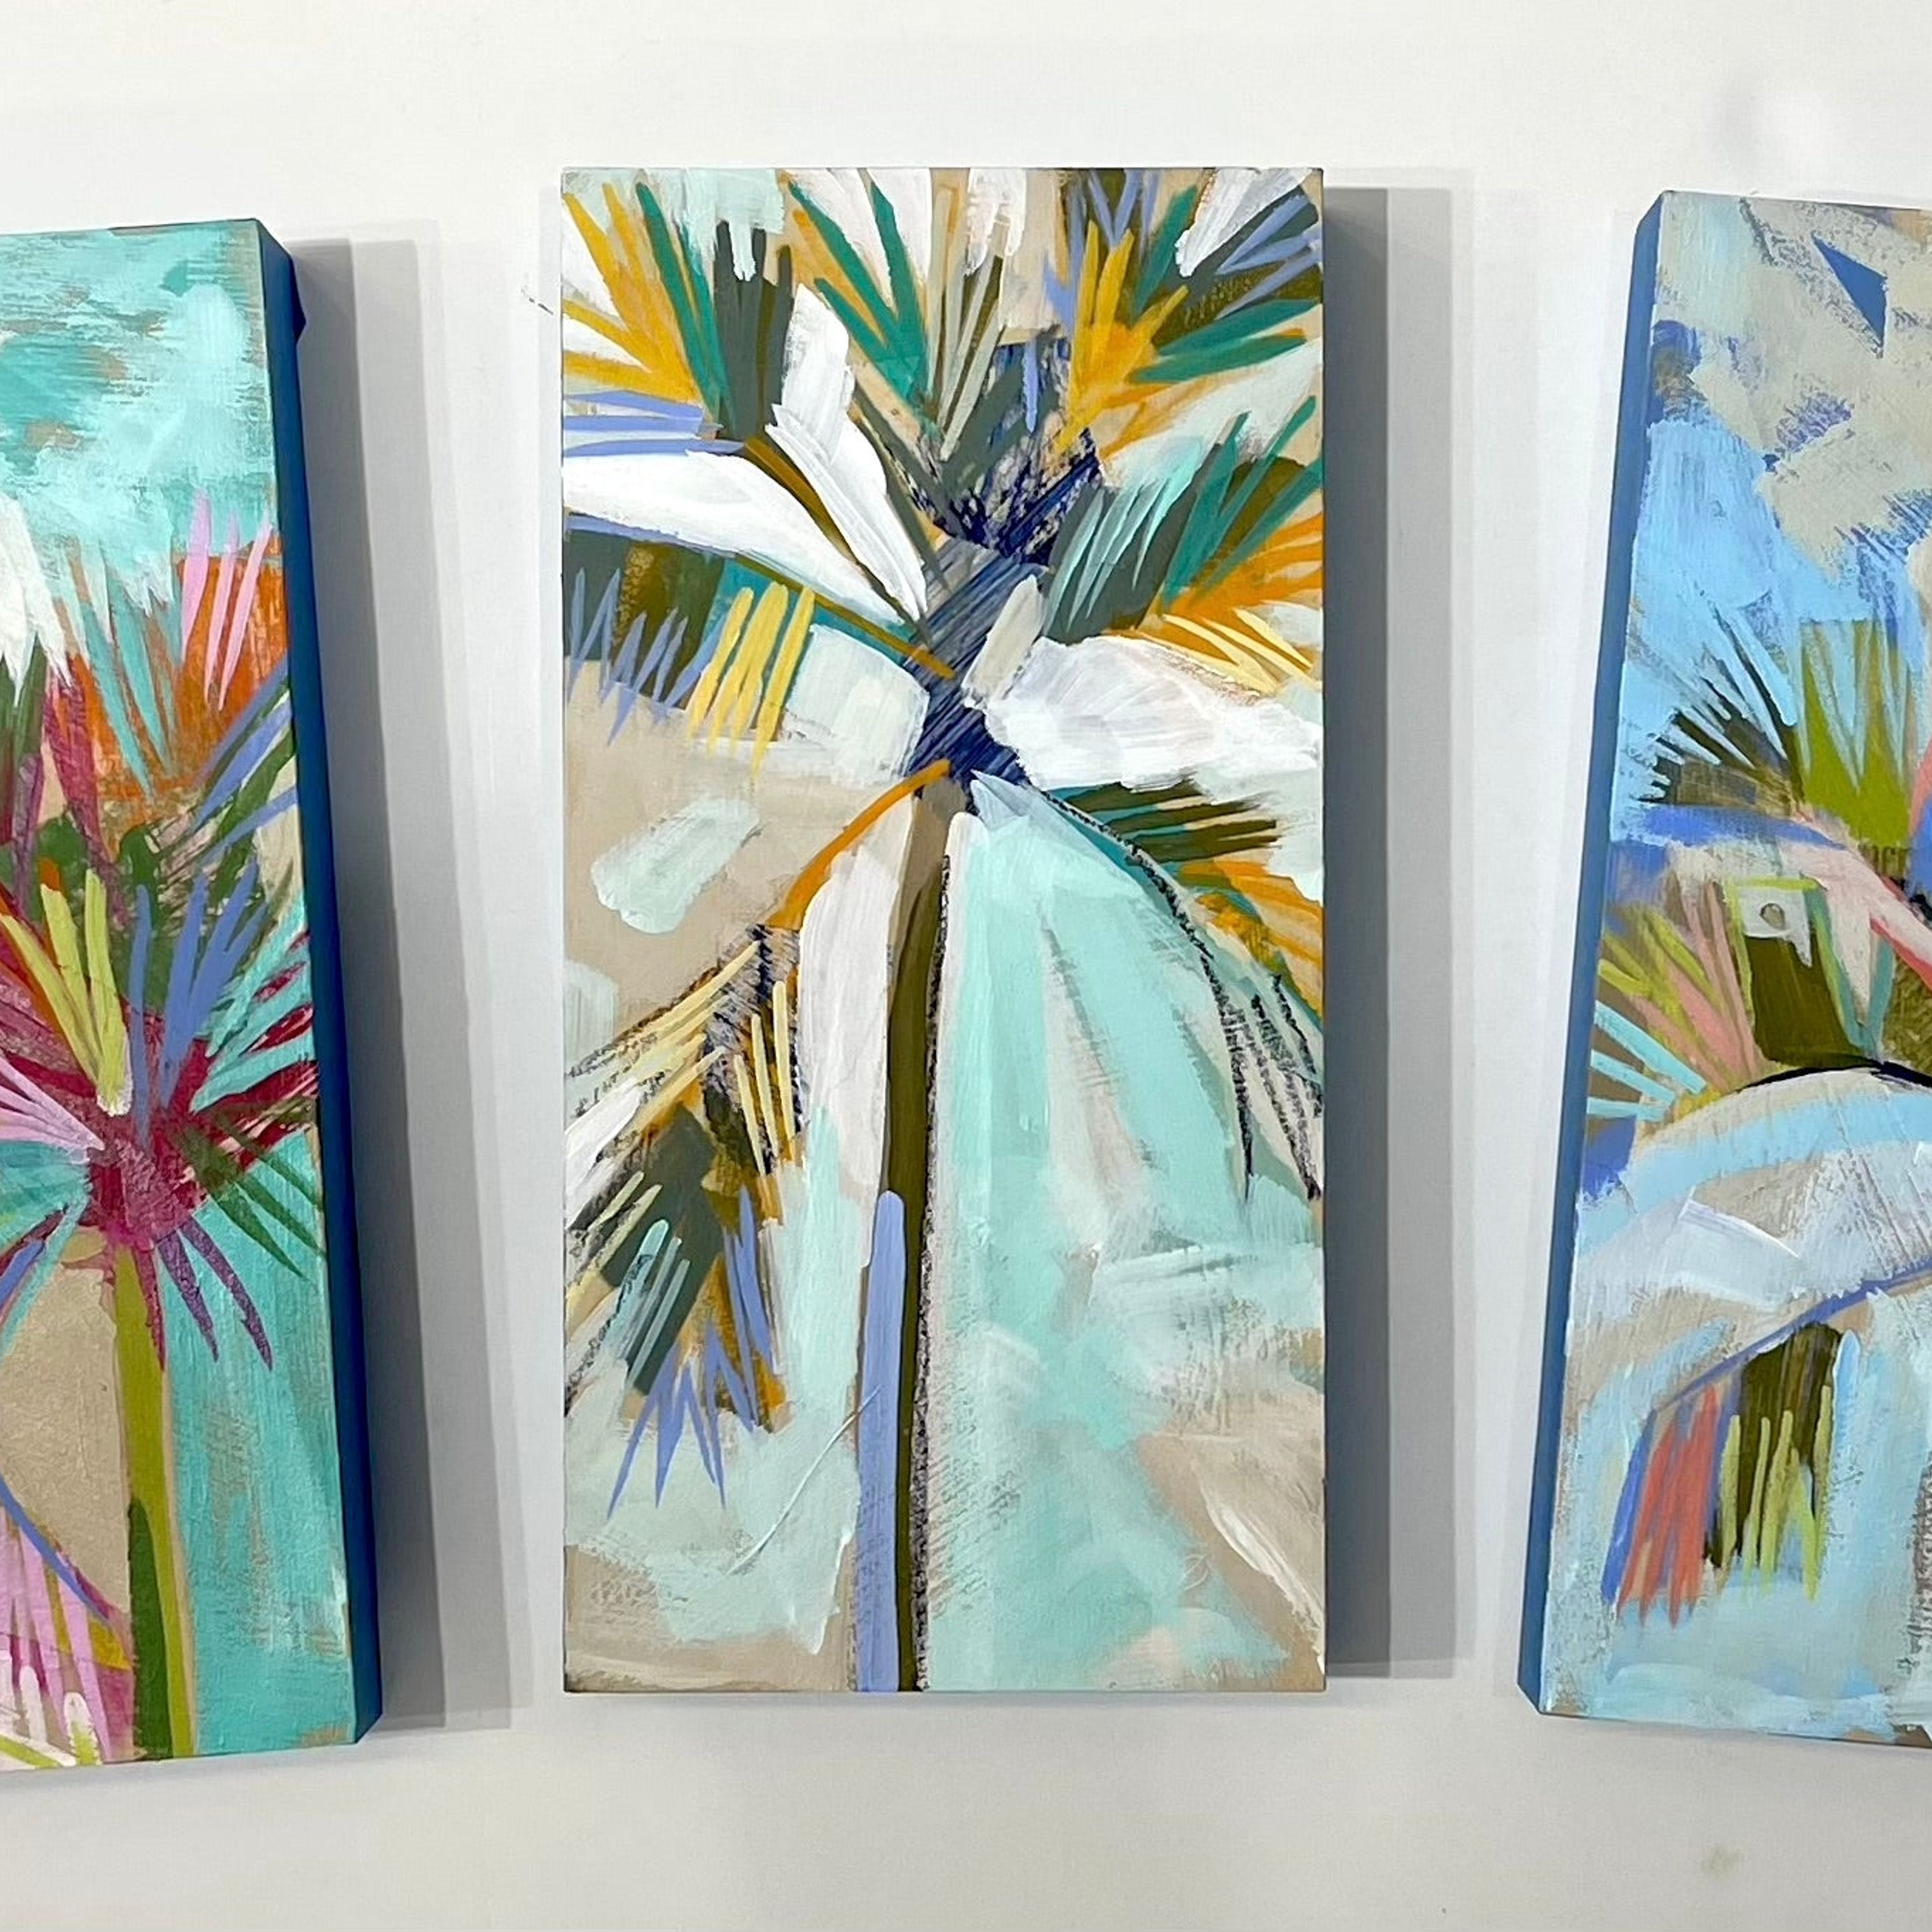 12x6" Holiday Palm no. 2 - Acrylic Painting on Panel